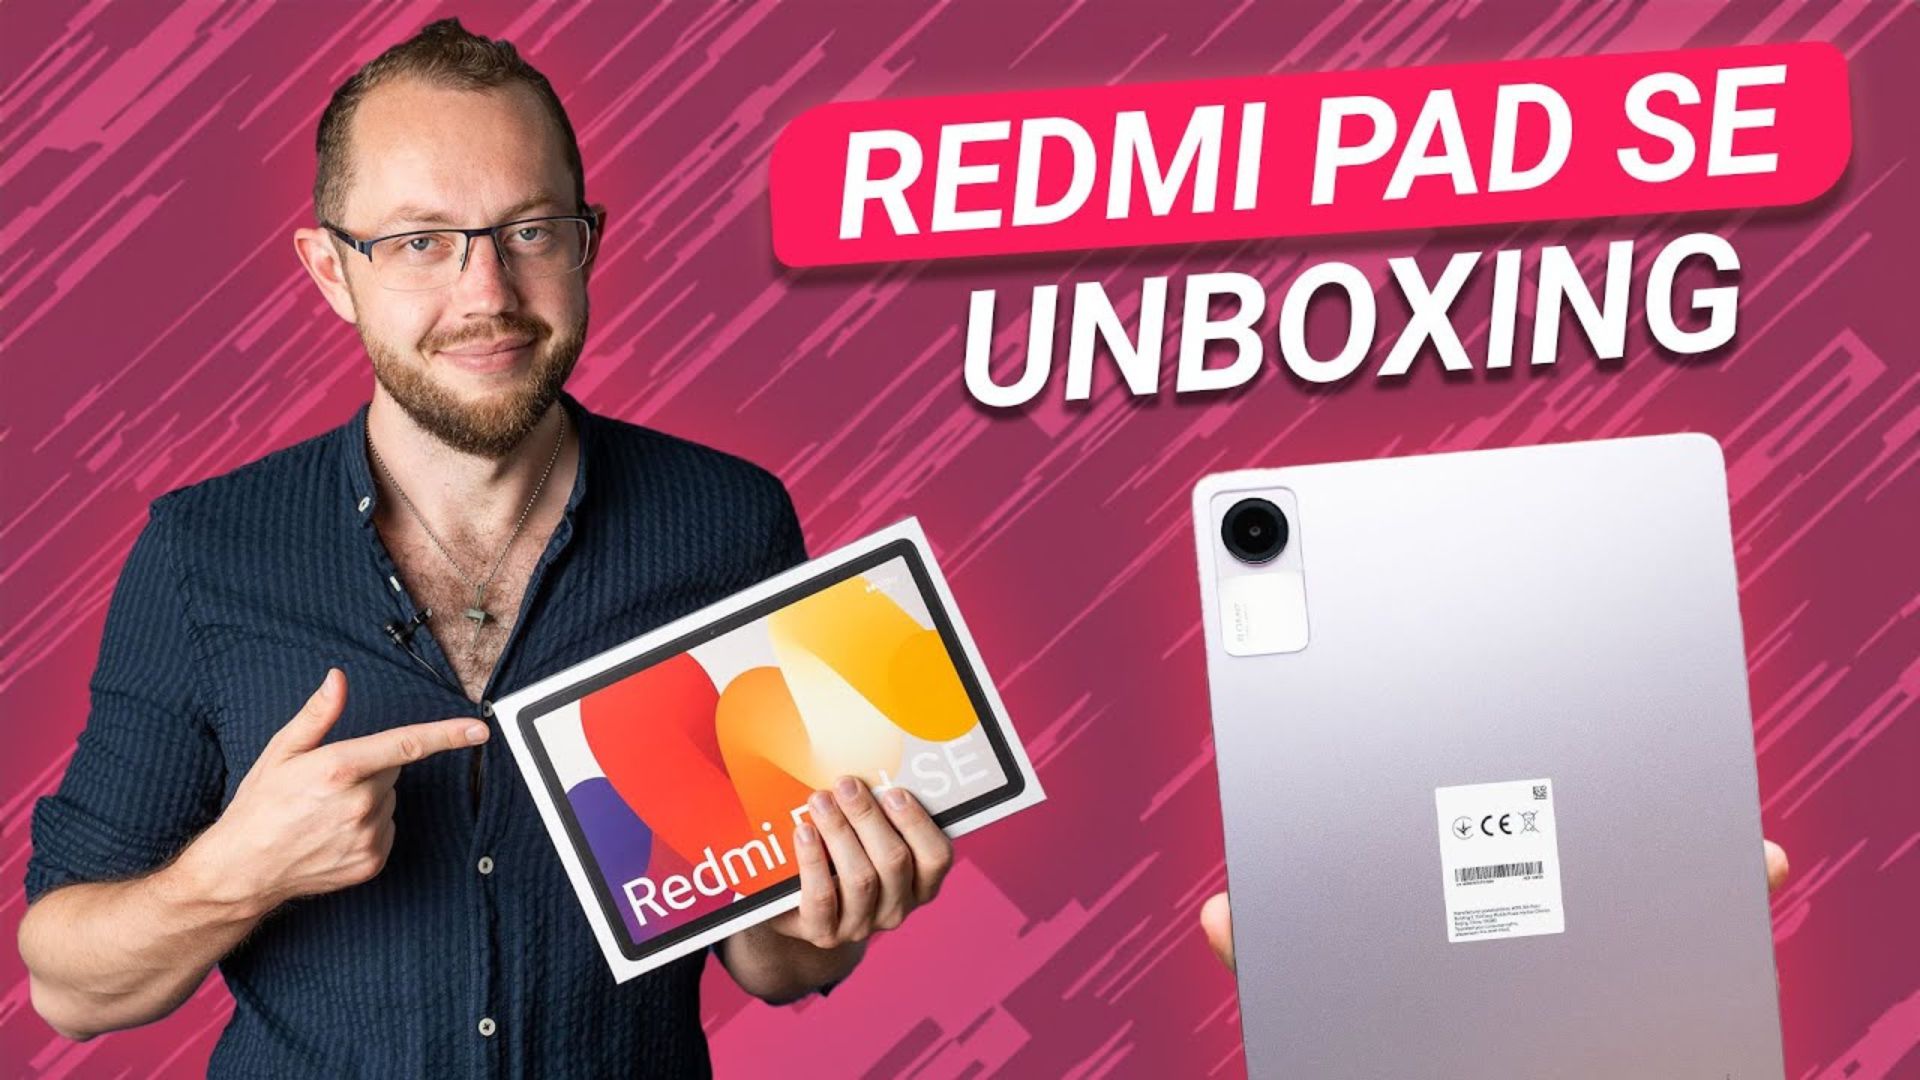 Redmi Pad SE unboxing and hands-on